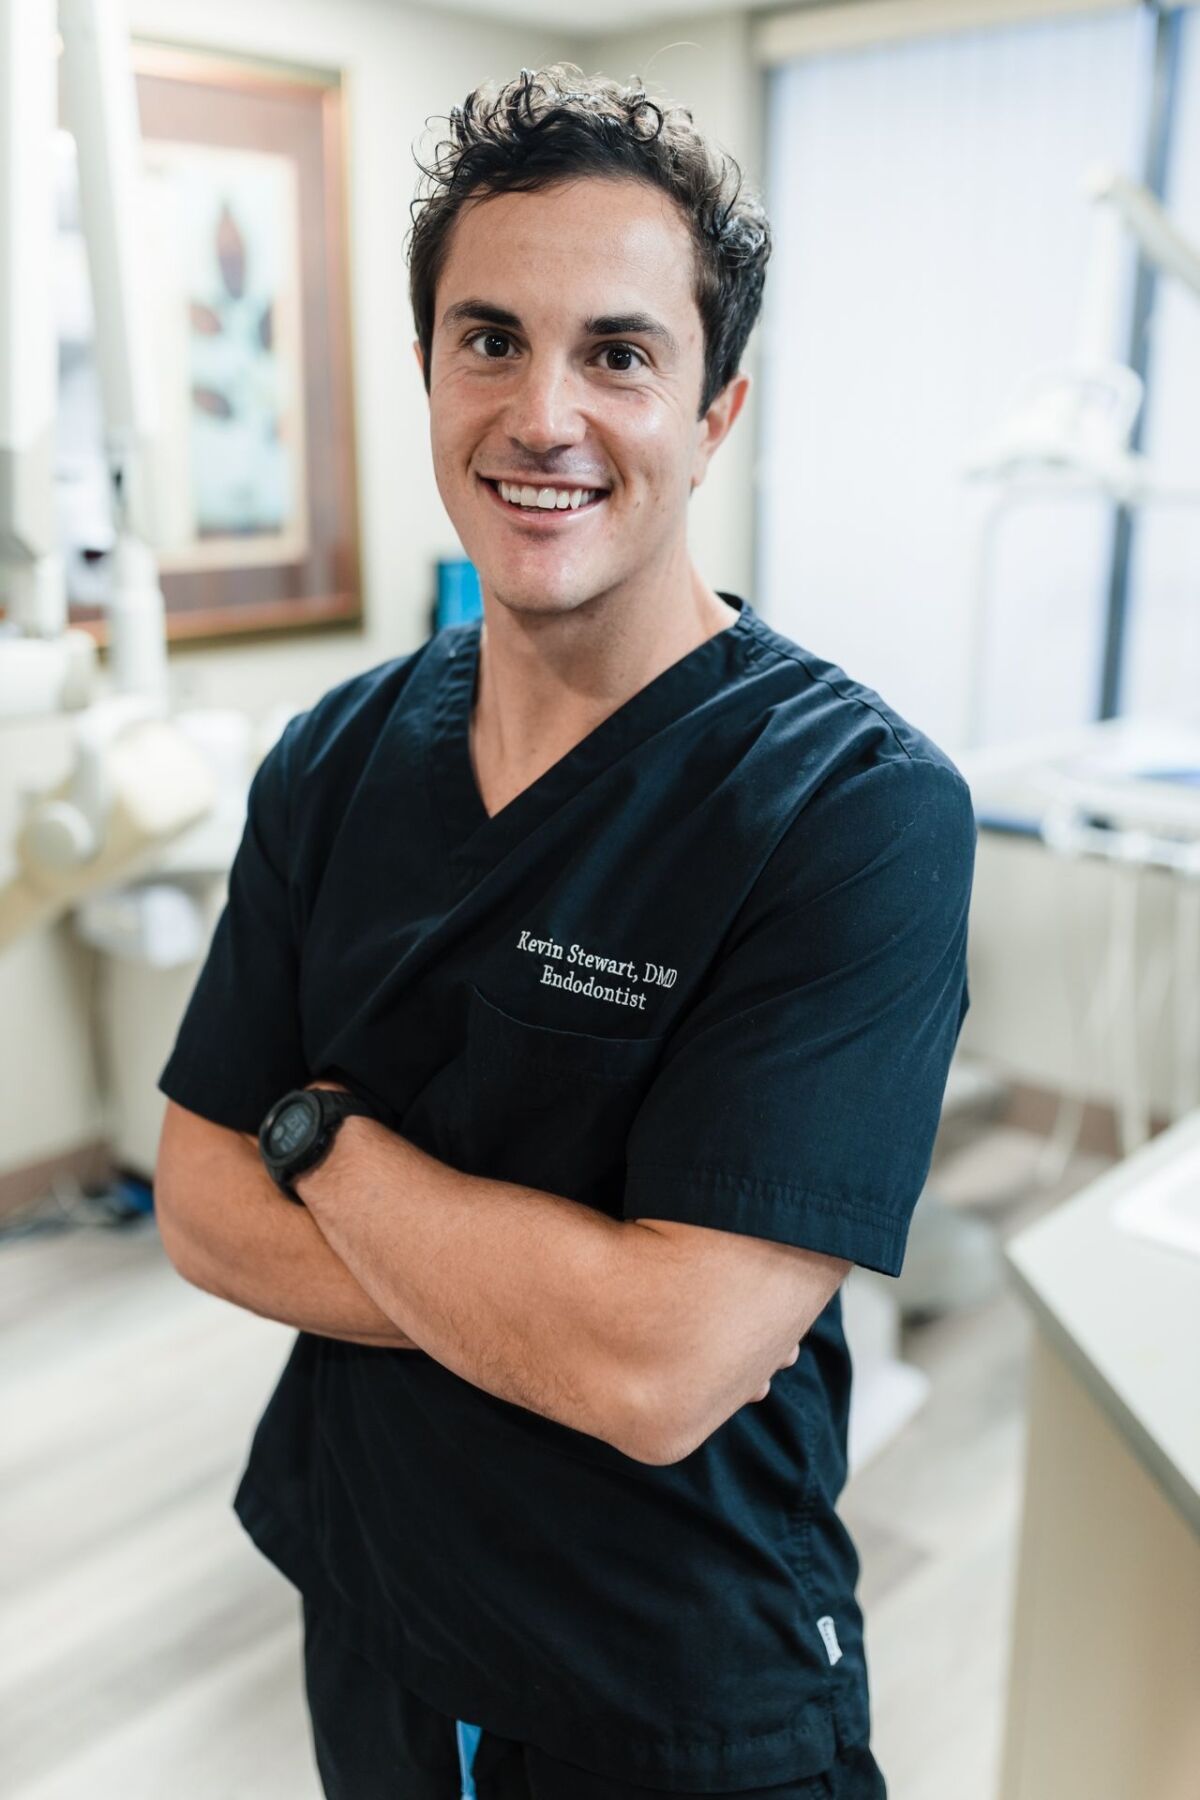 Dr. Kevin Stewart hopes to continue recently acquired La Jolla Village Endodontics' four-decade tradition.